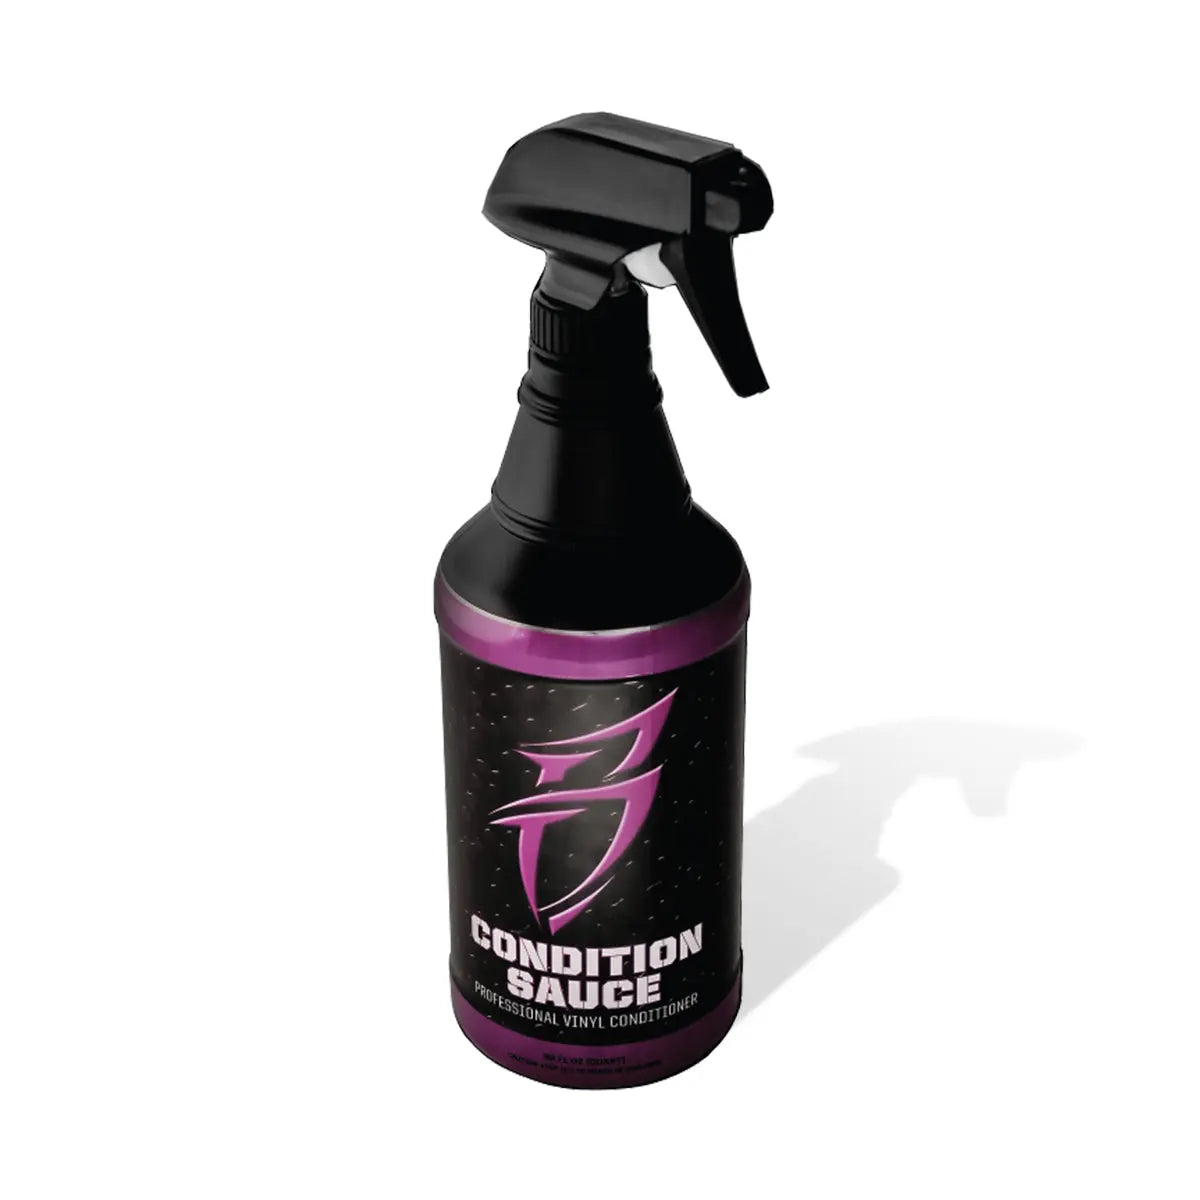 Boat Bling Condition Sauce - 32oz Spray Bottle - Interior Conditioner Boat Bling